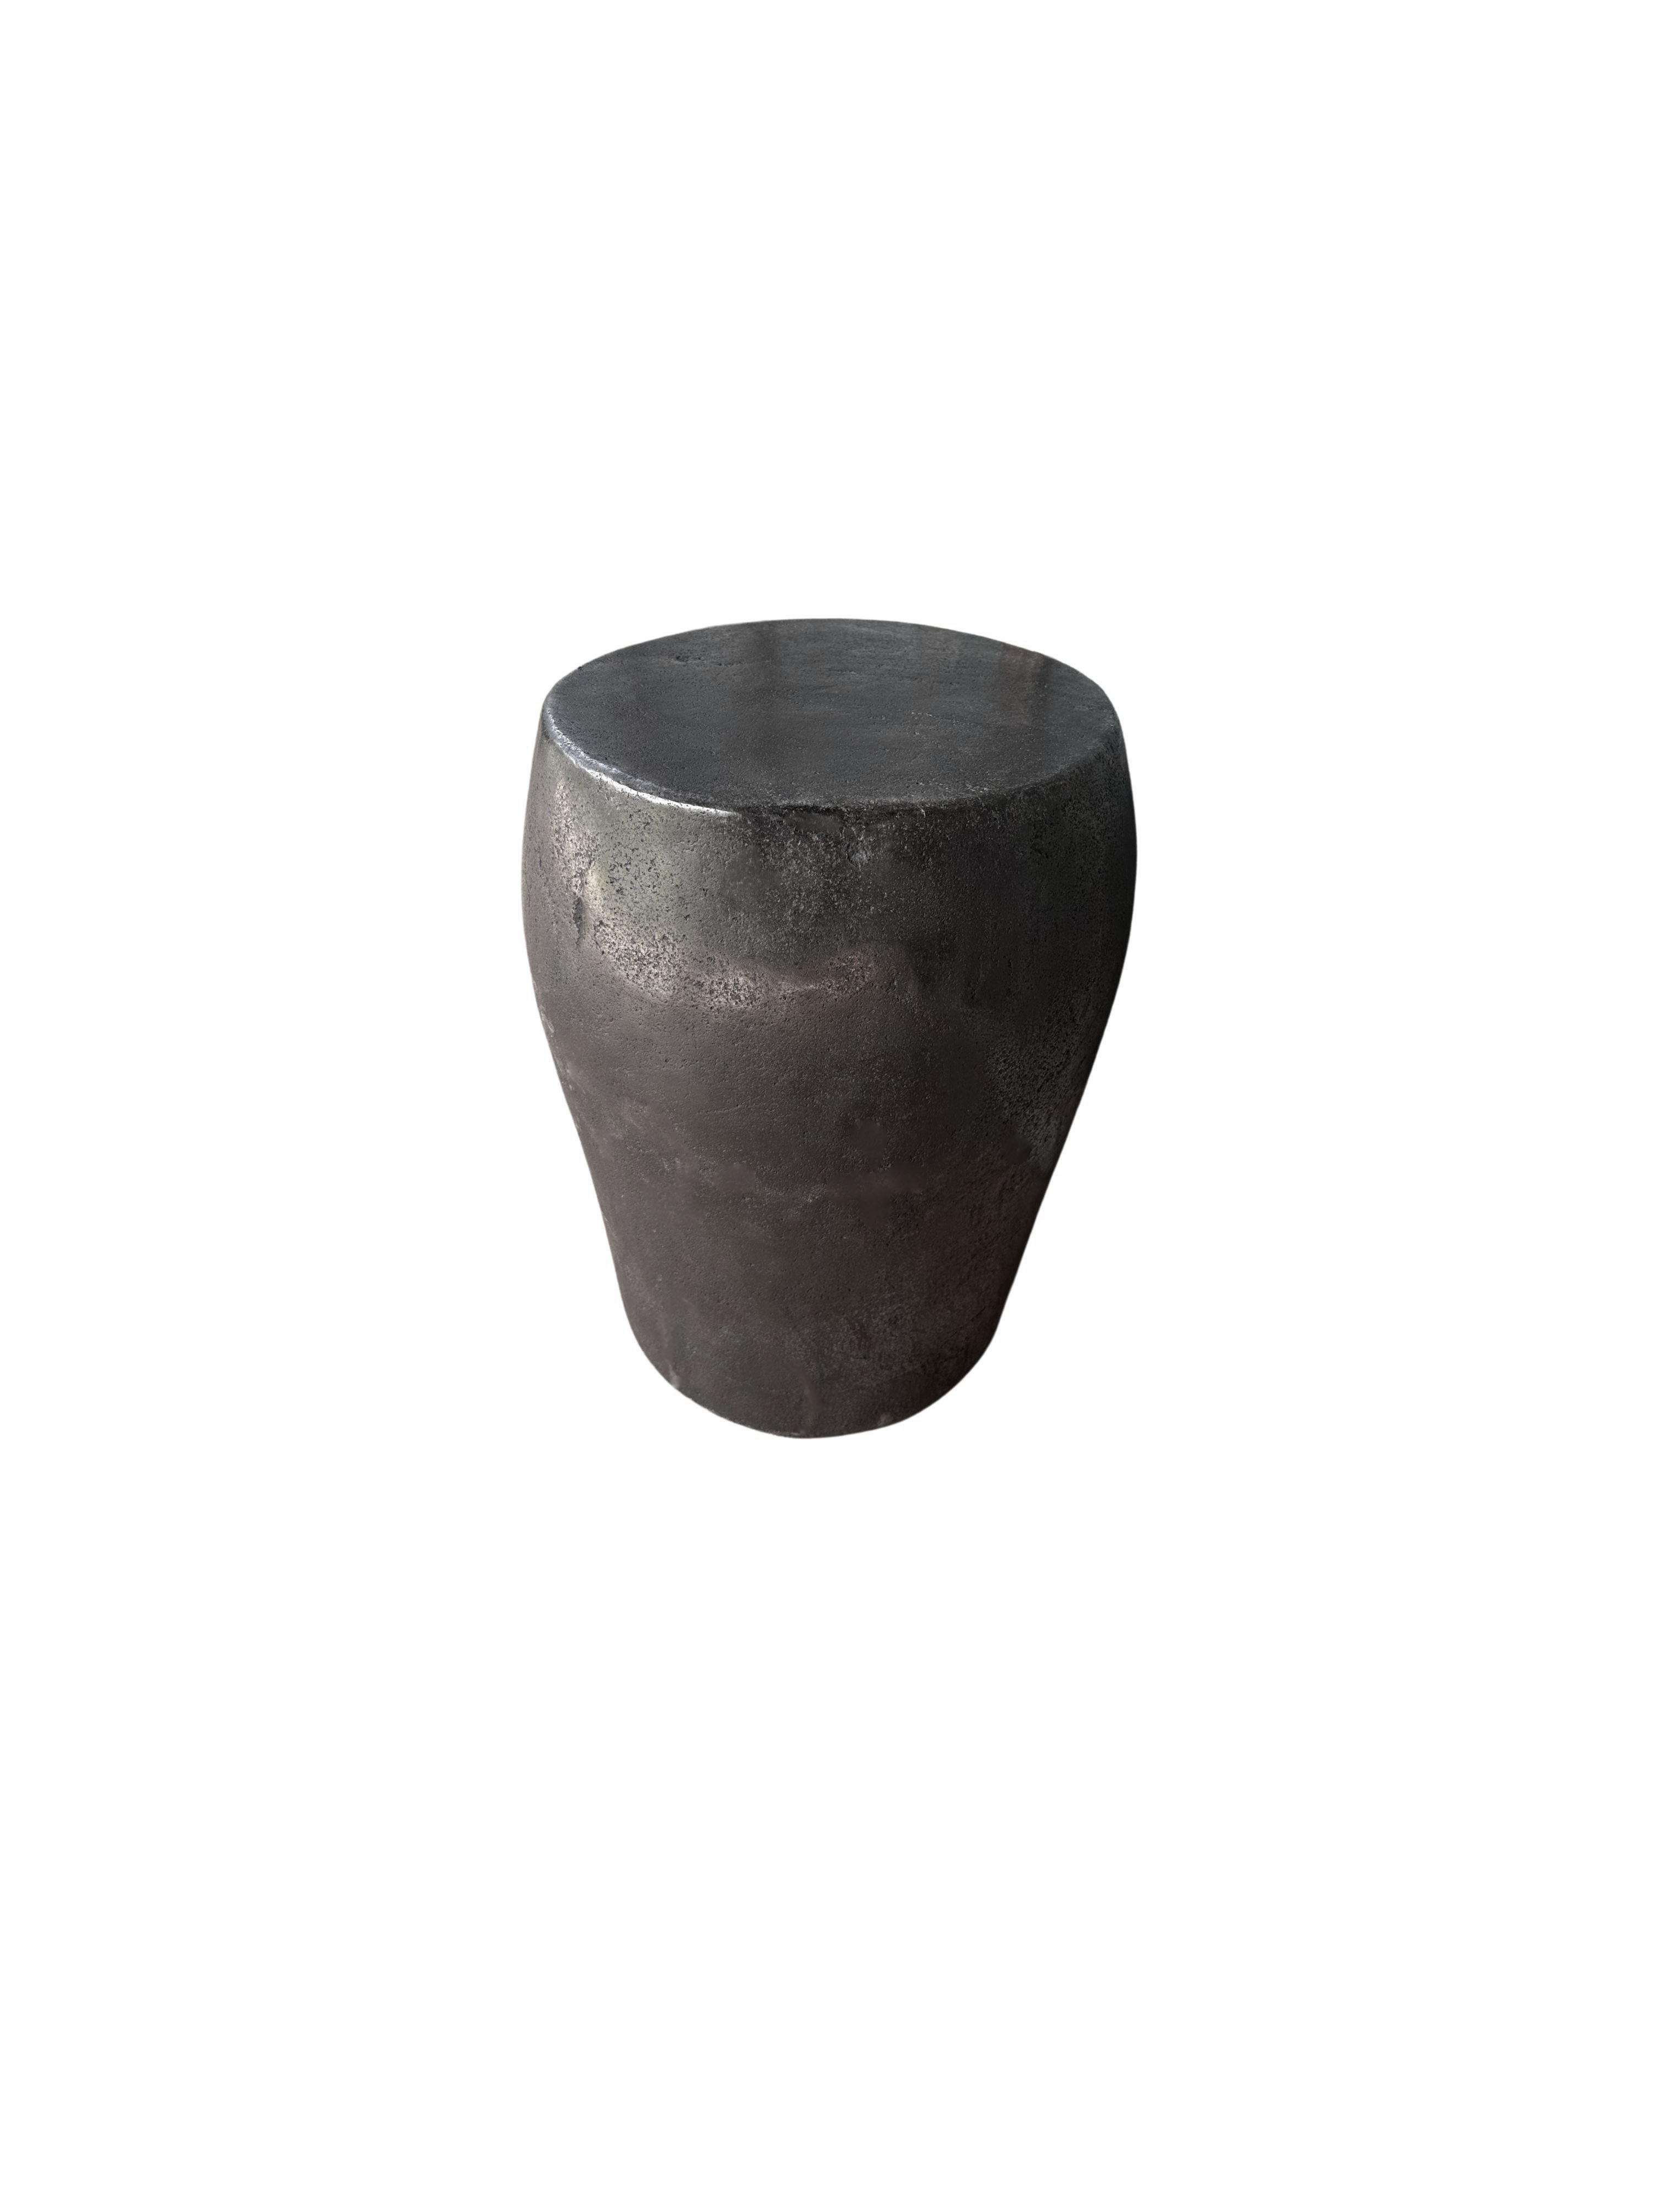 Organic Modern Solid Stone Side Table / Pedestal from Java, Indonesia For Sale